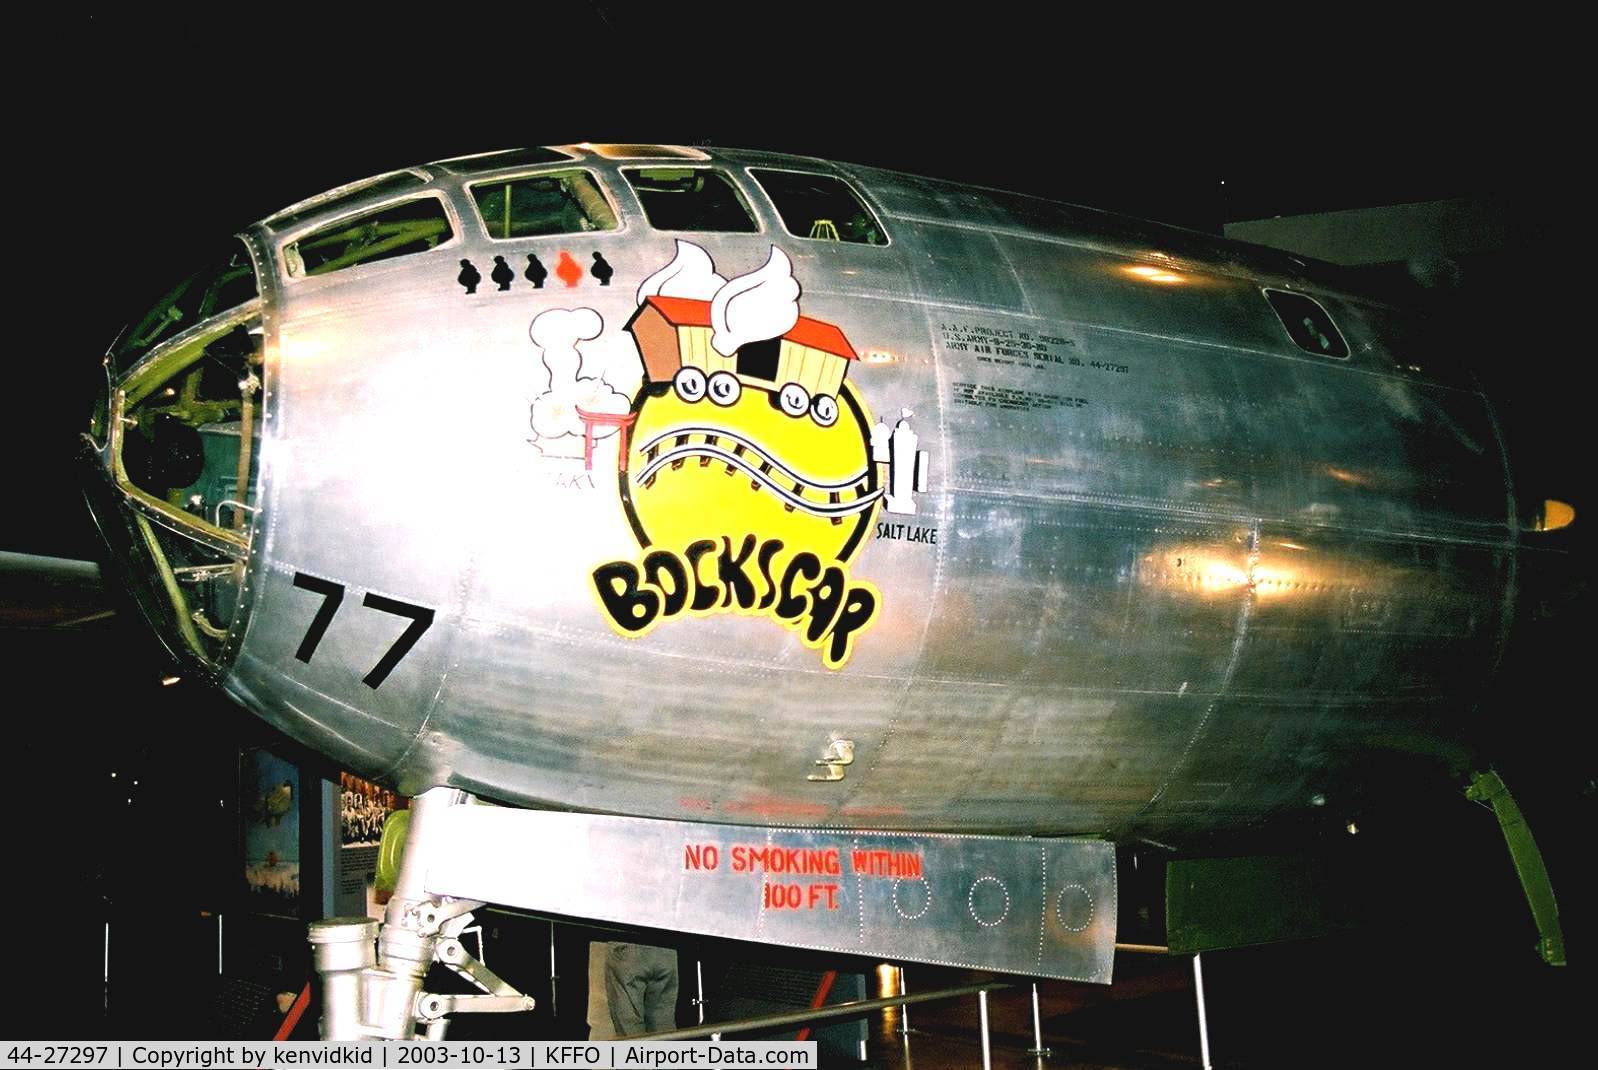 44-27297, 1944 Boeing B-29 Superfortress C/N 3615, At The Museum of the United States Air Force Dayton Ohio.